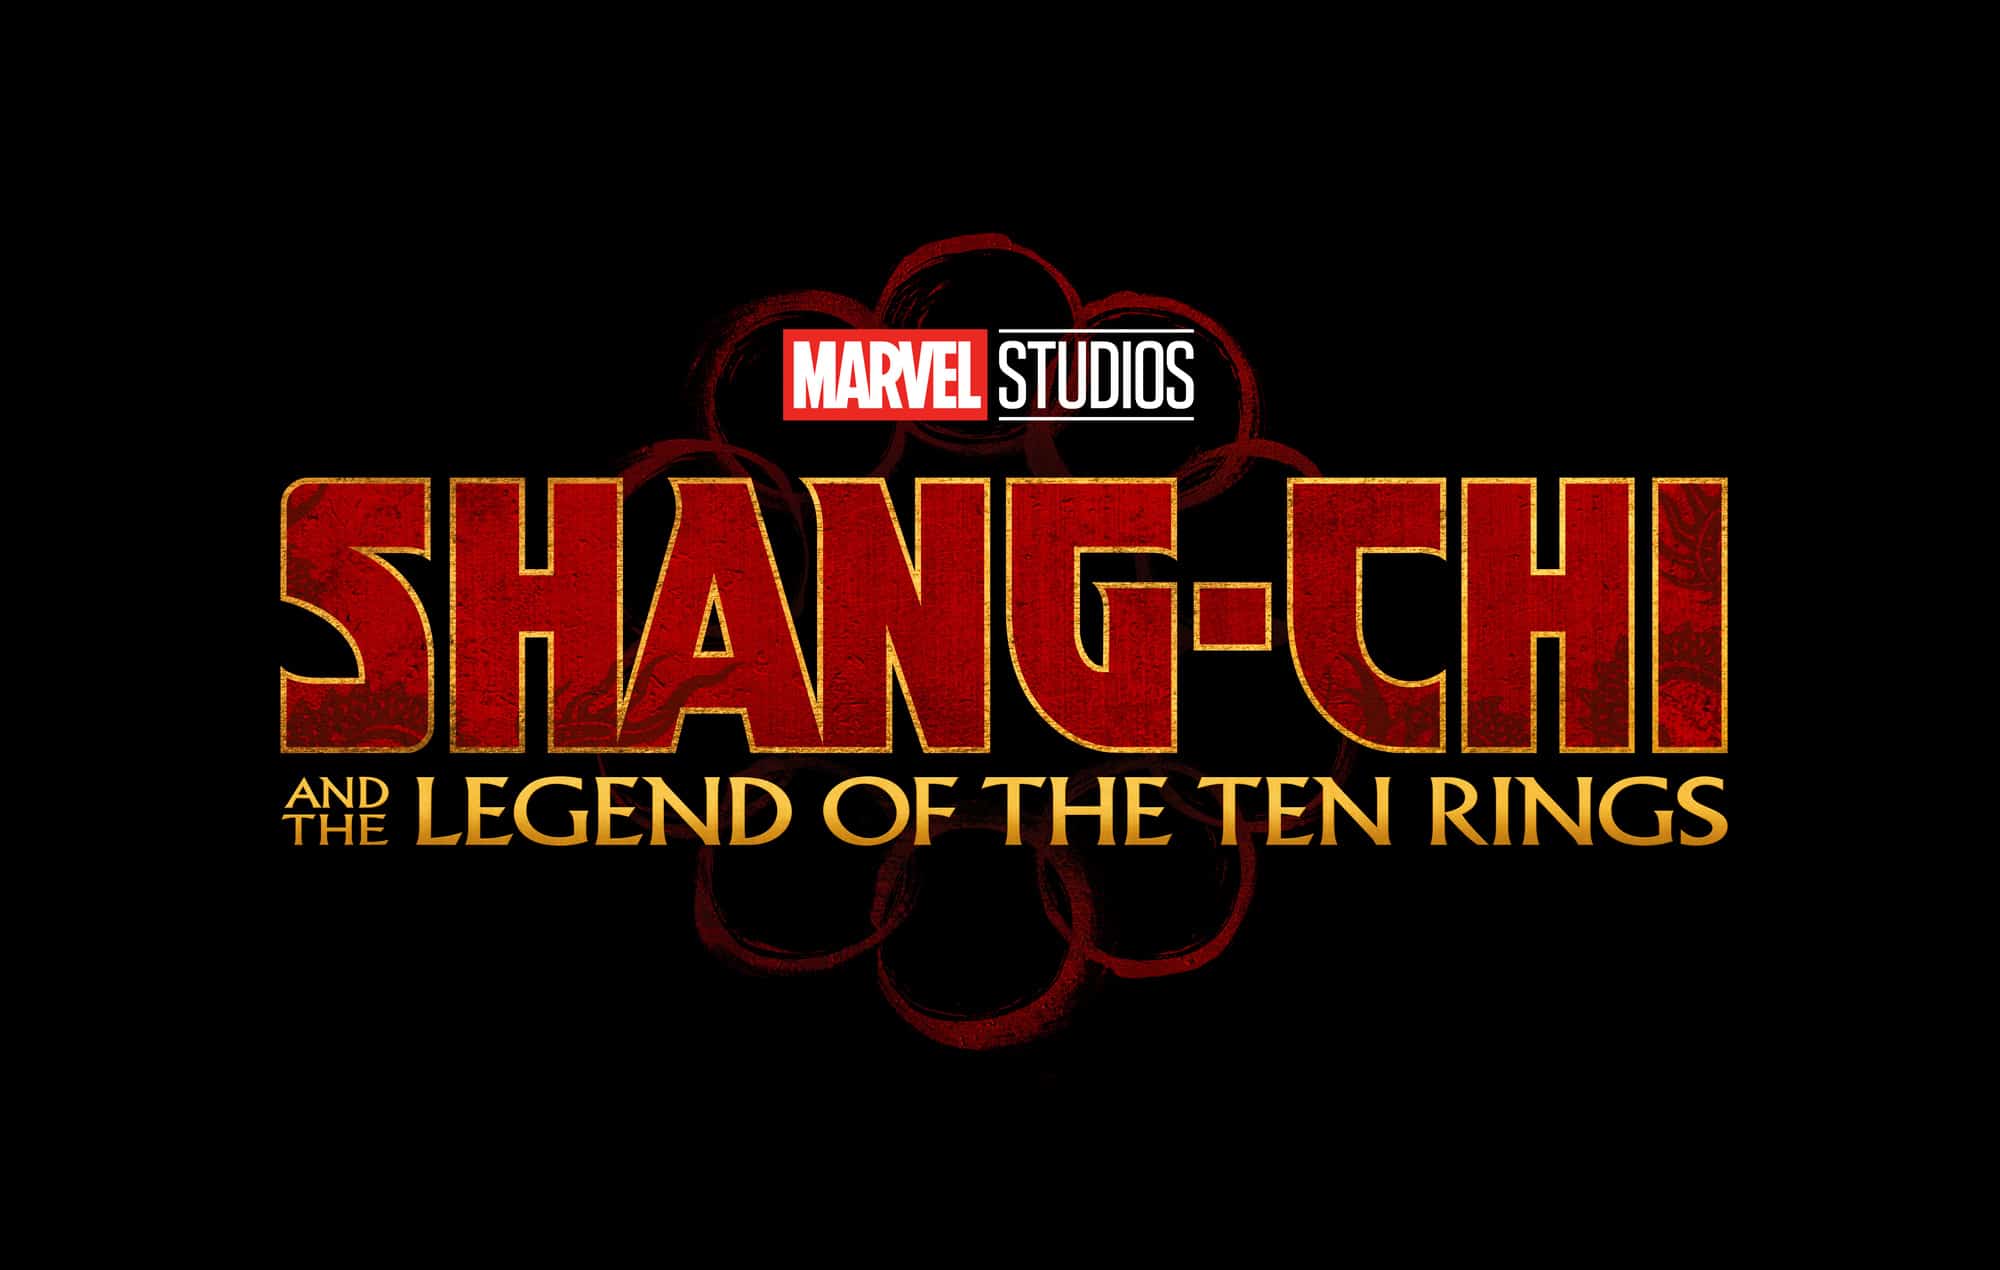 New Featurette Released for Marvel Studios’ Shang-Chi and The Legend of The Ten Rings